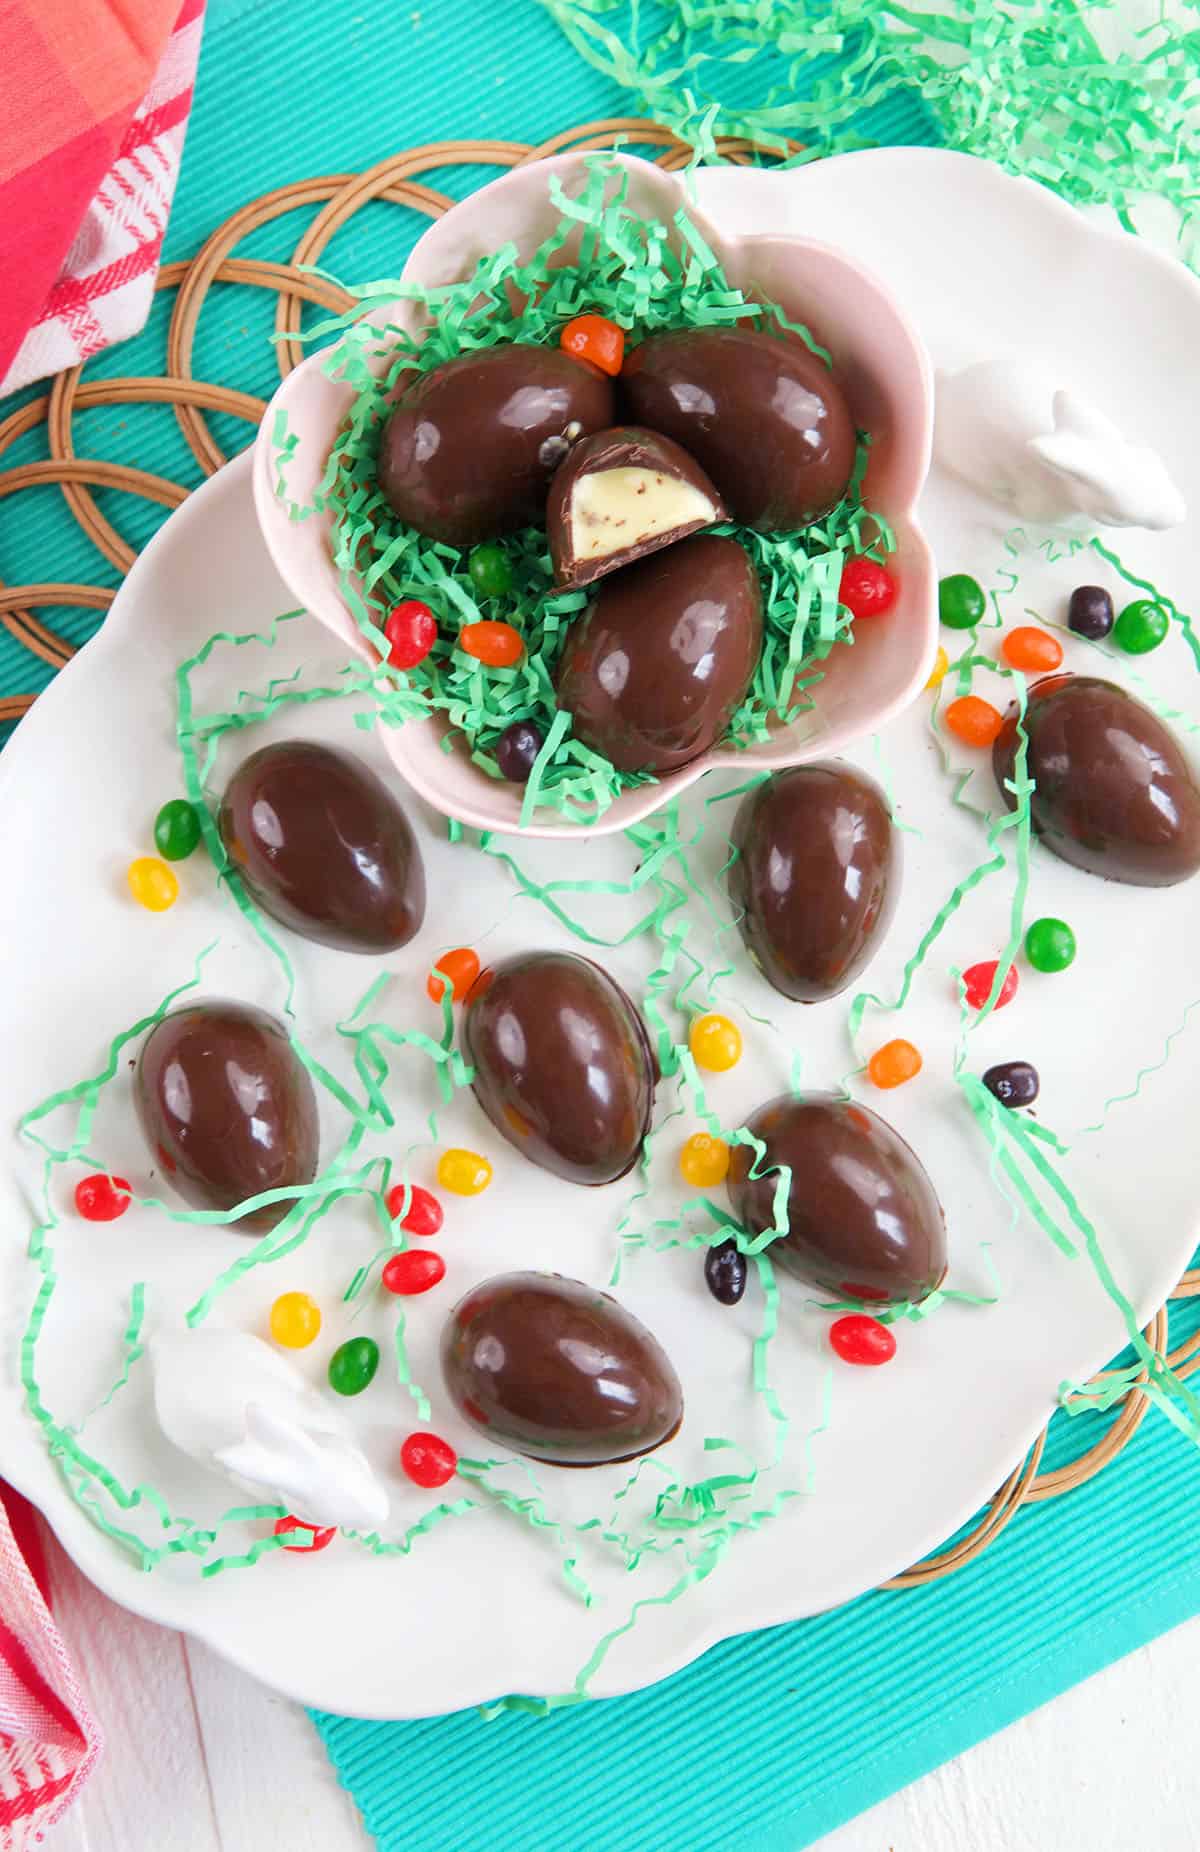 Chocolate eggs on a white platter with a bowl filled with easter grass and more chocolate eggs.